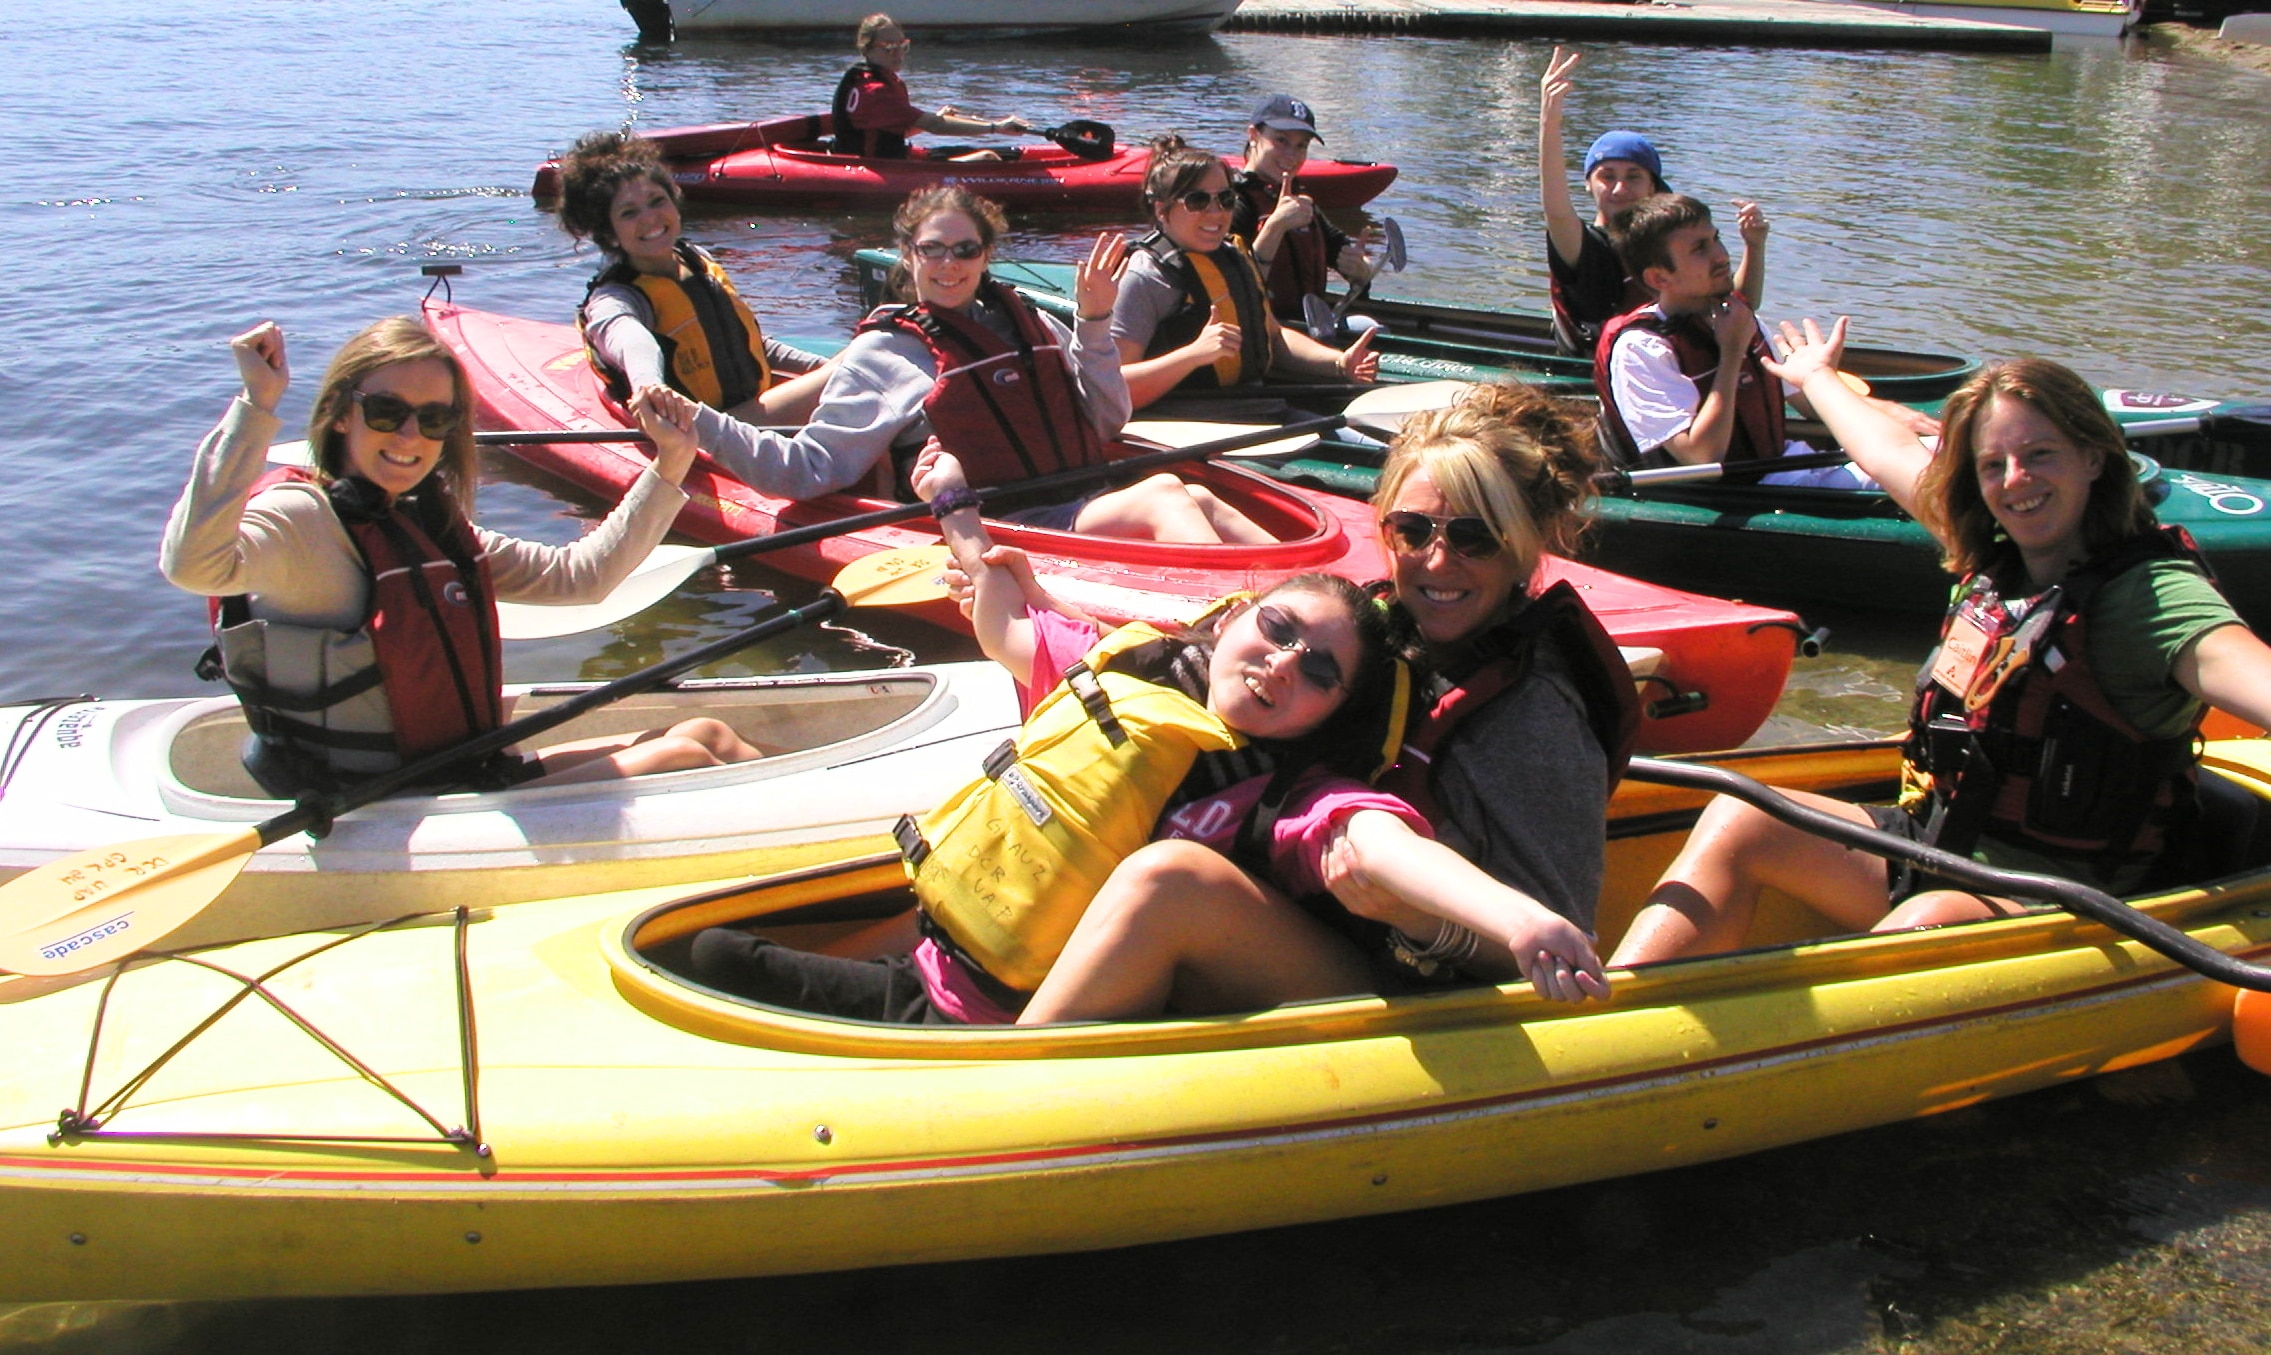 A mix of single and tandem kayaks on the water. The paddlers are raising their hands in the air and smiling. One paddler is sitting in the lap of another paddler.